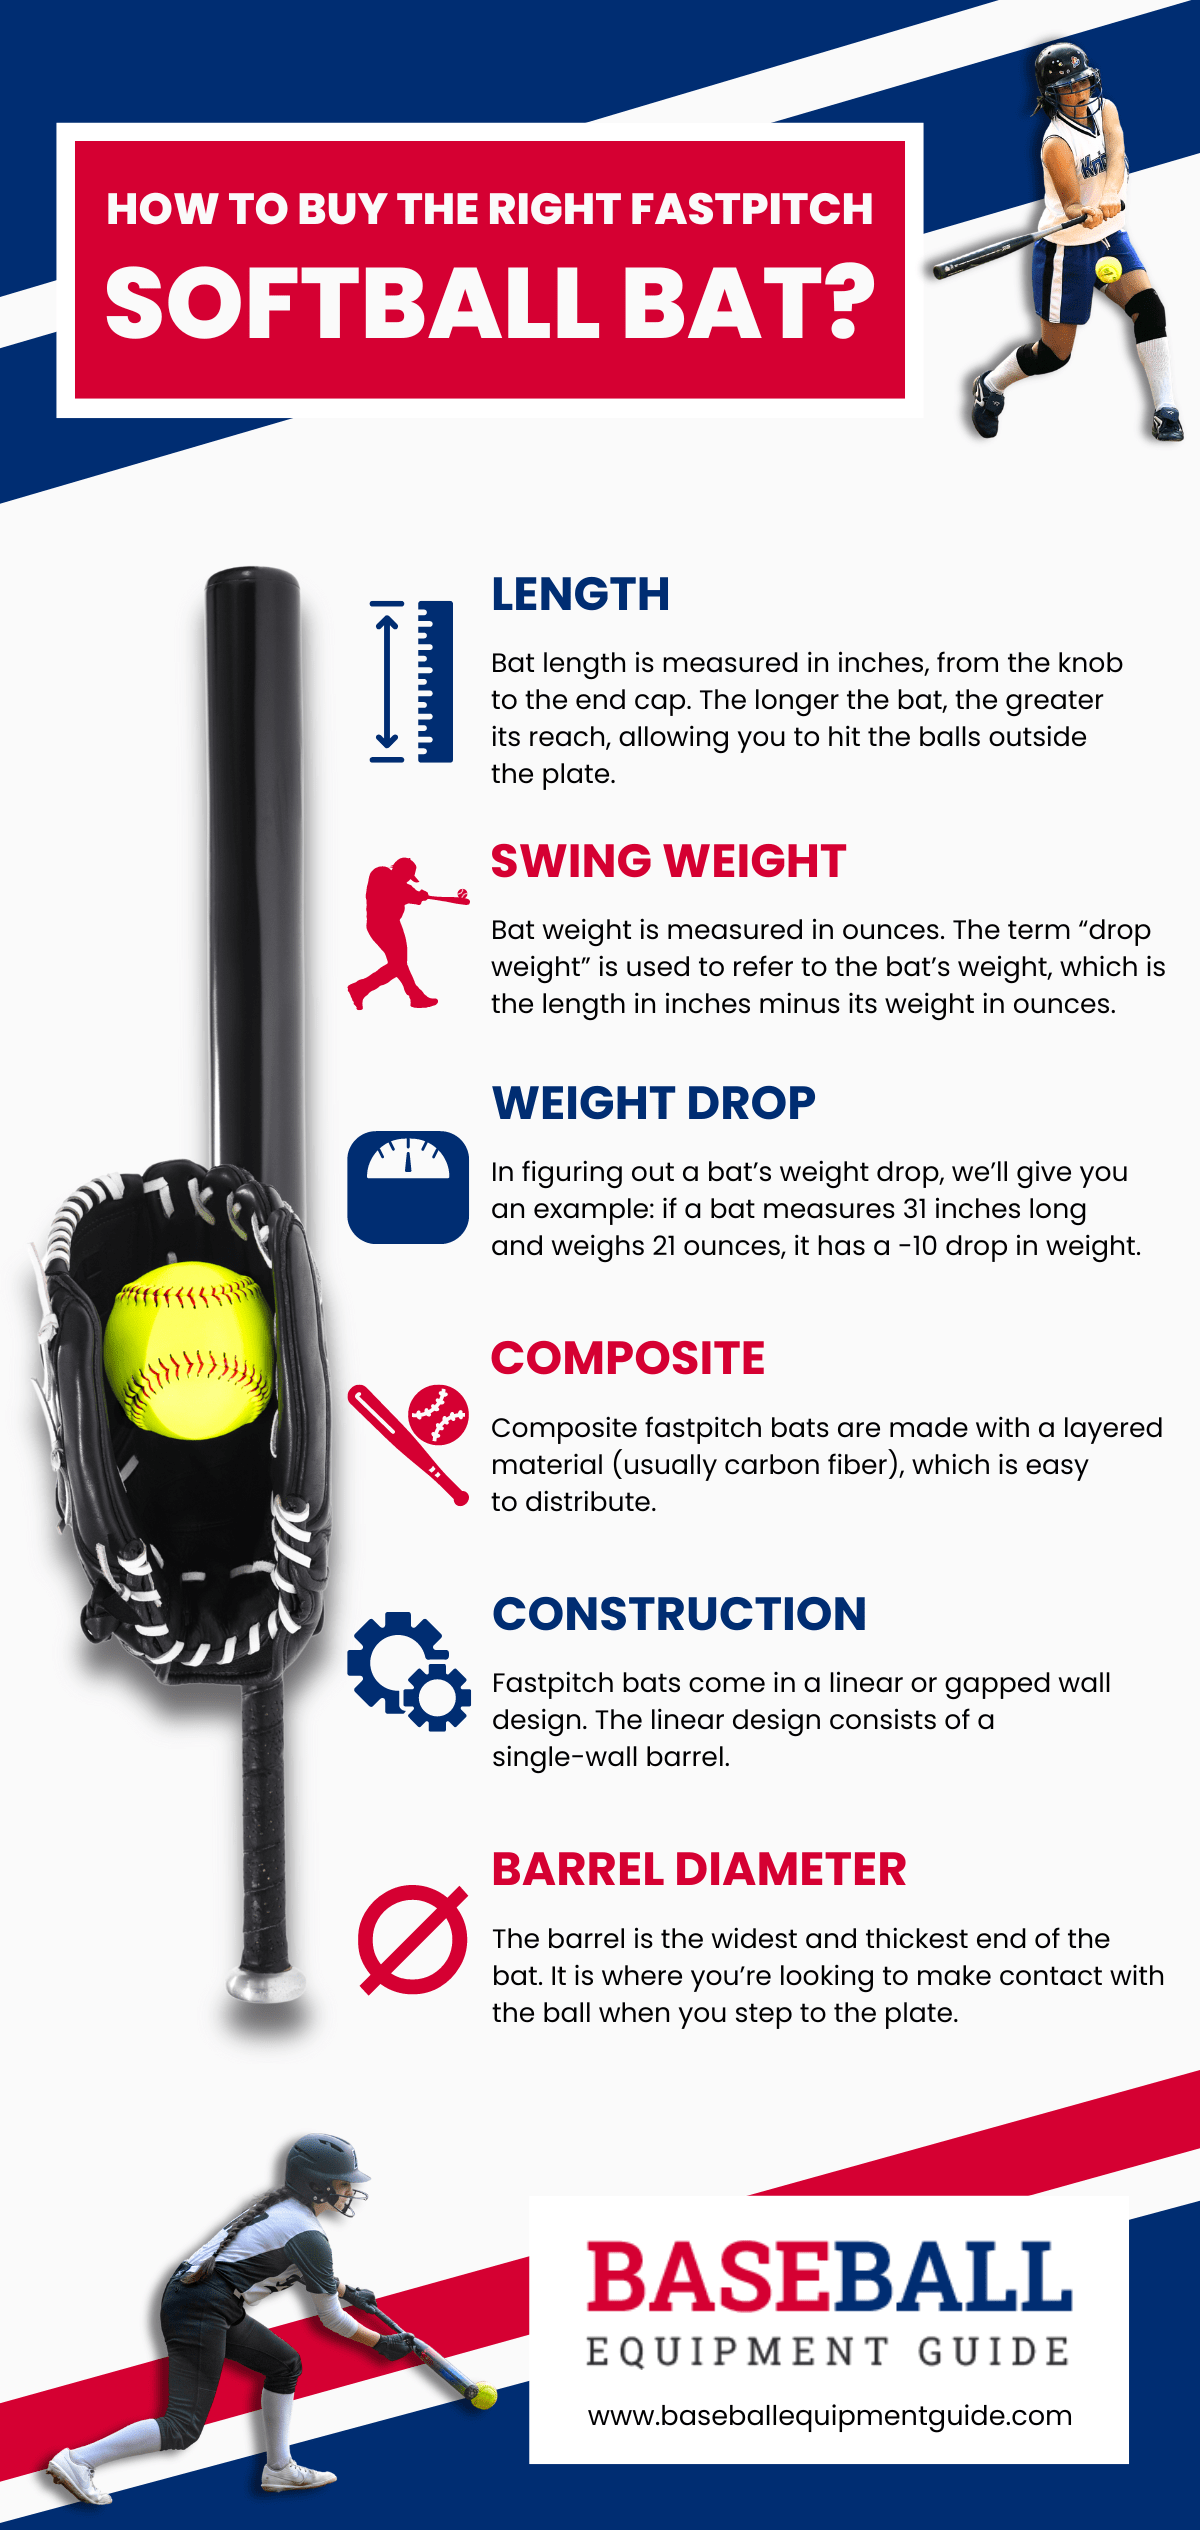 How to buy the right fastpitch softball bat